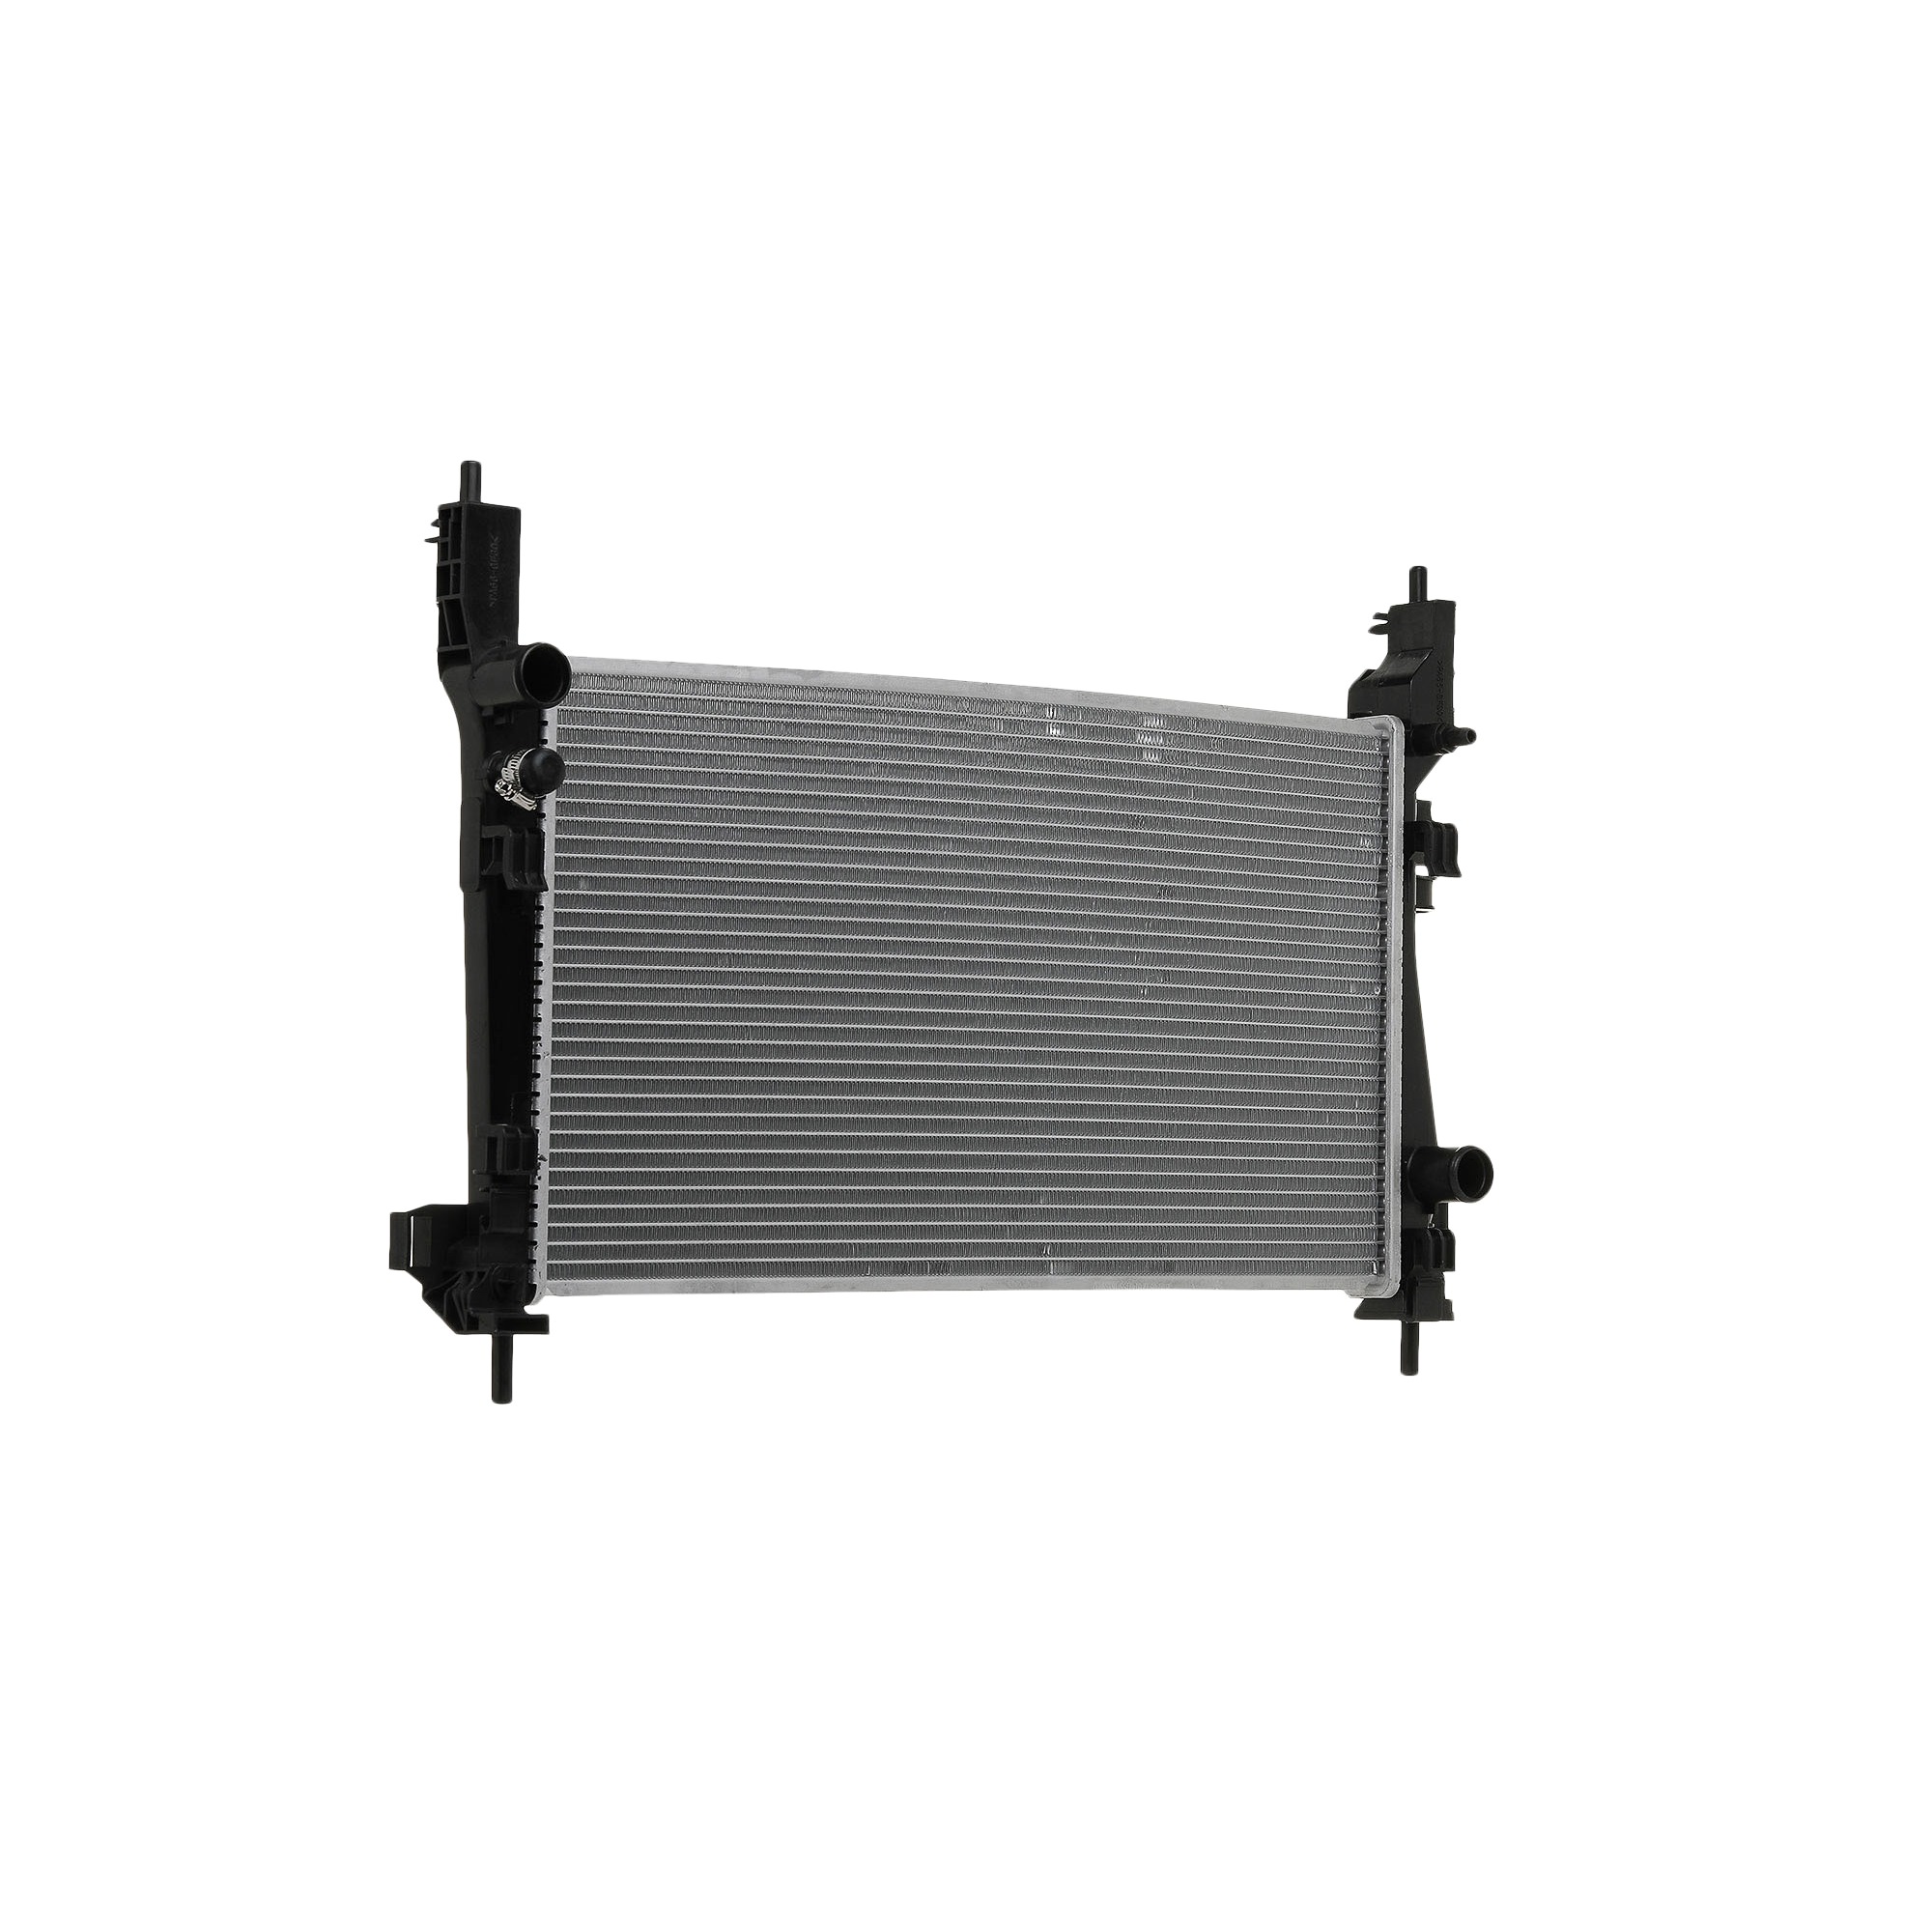 SKRD-0121336 STARK Radiators FIAT Aluminium, with accessories, Right Connector, Mechanically jointed cooling fins